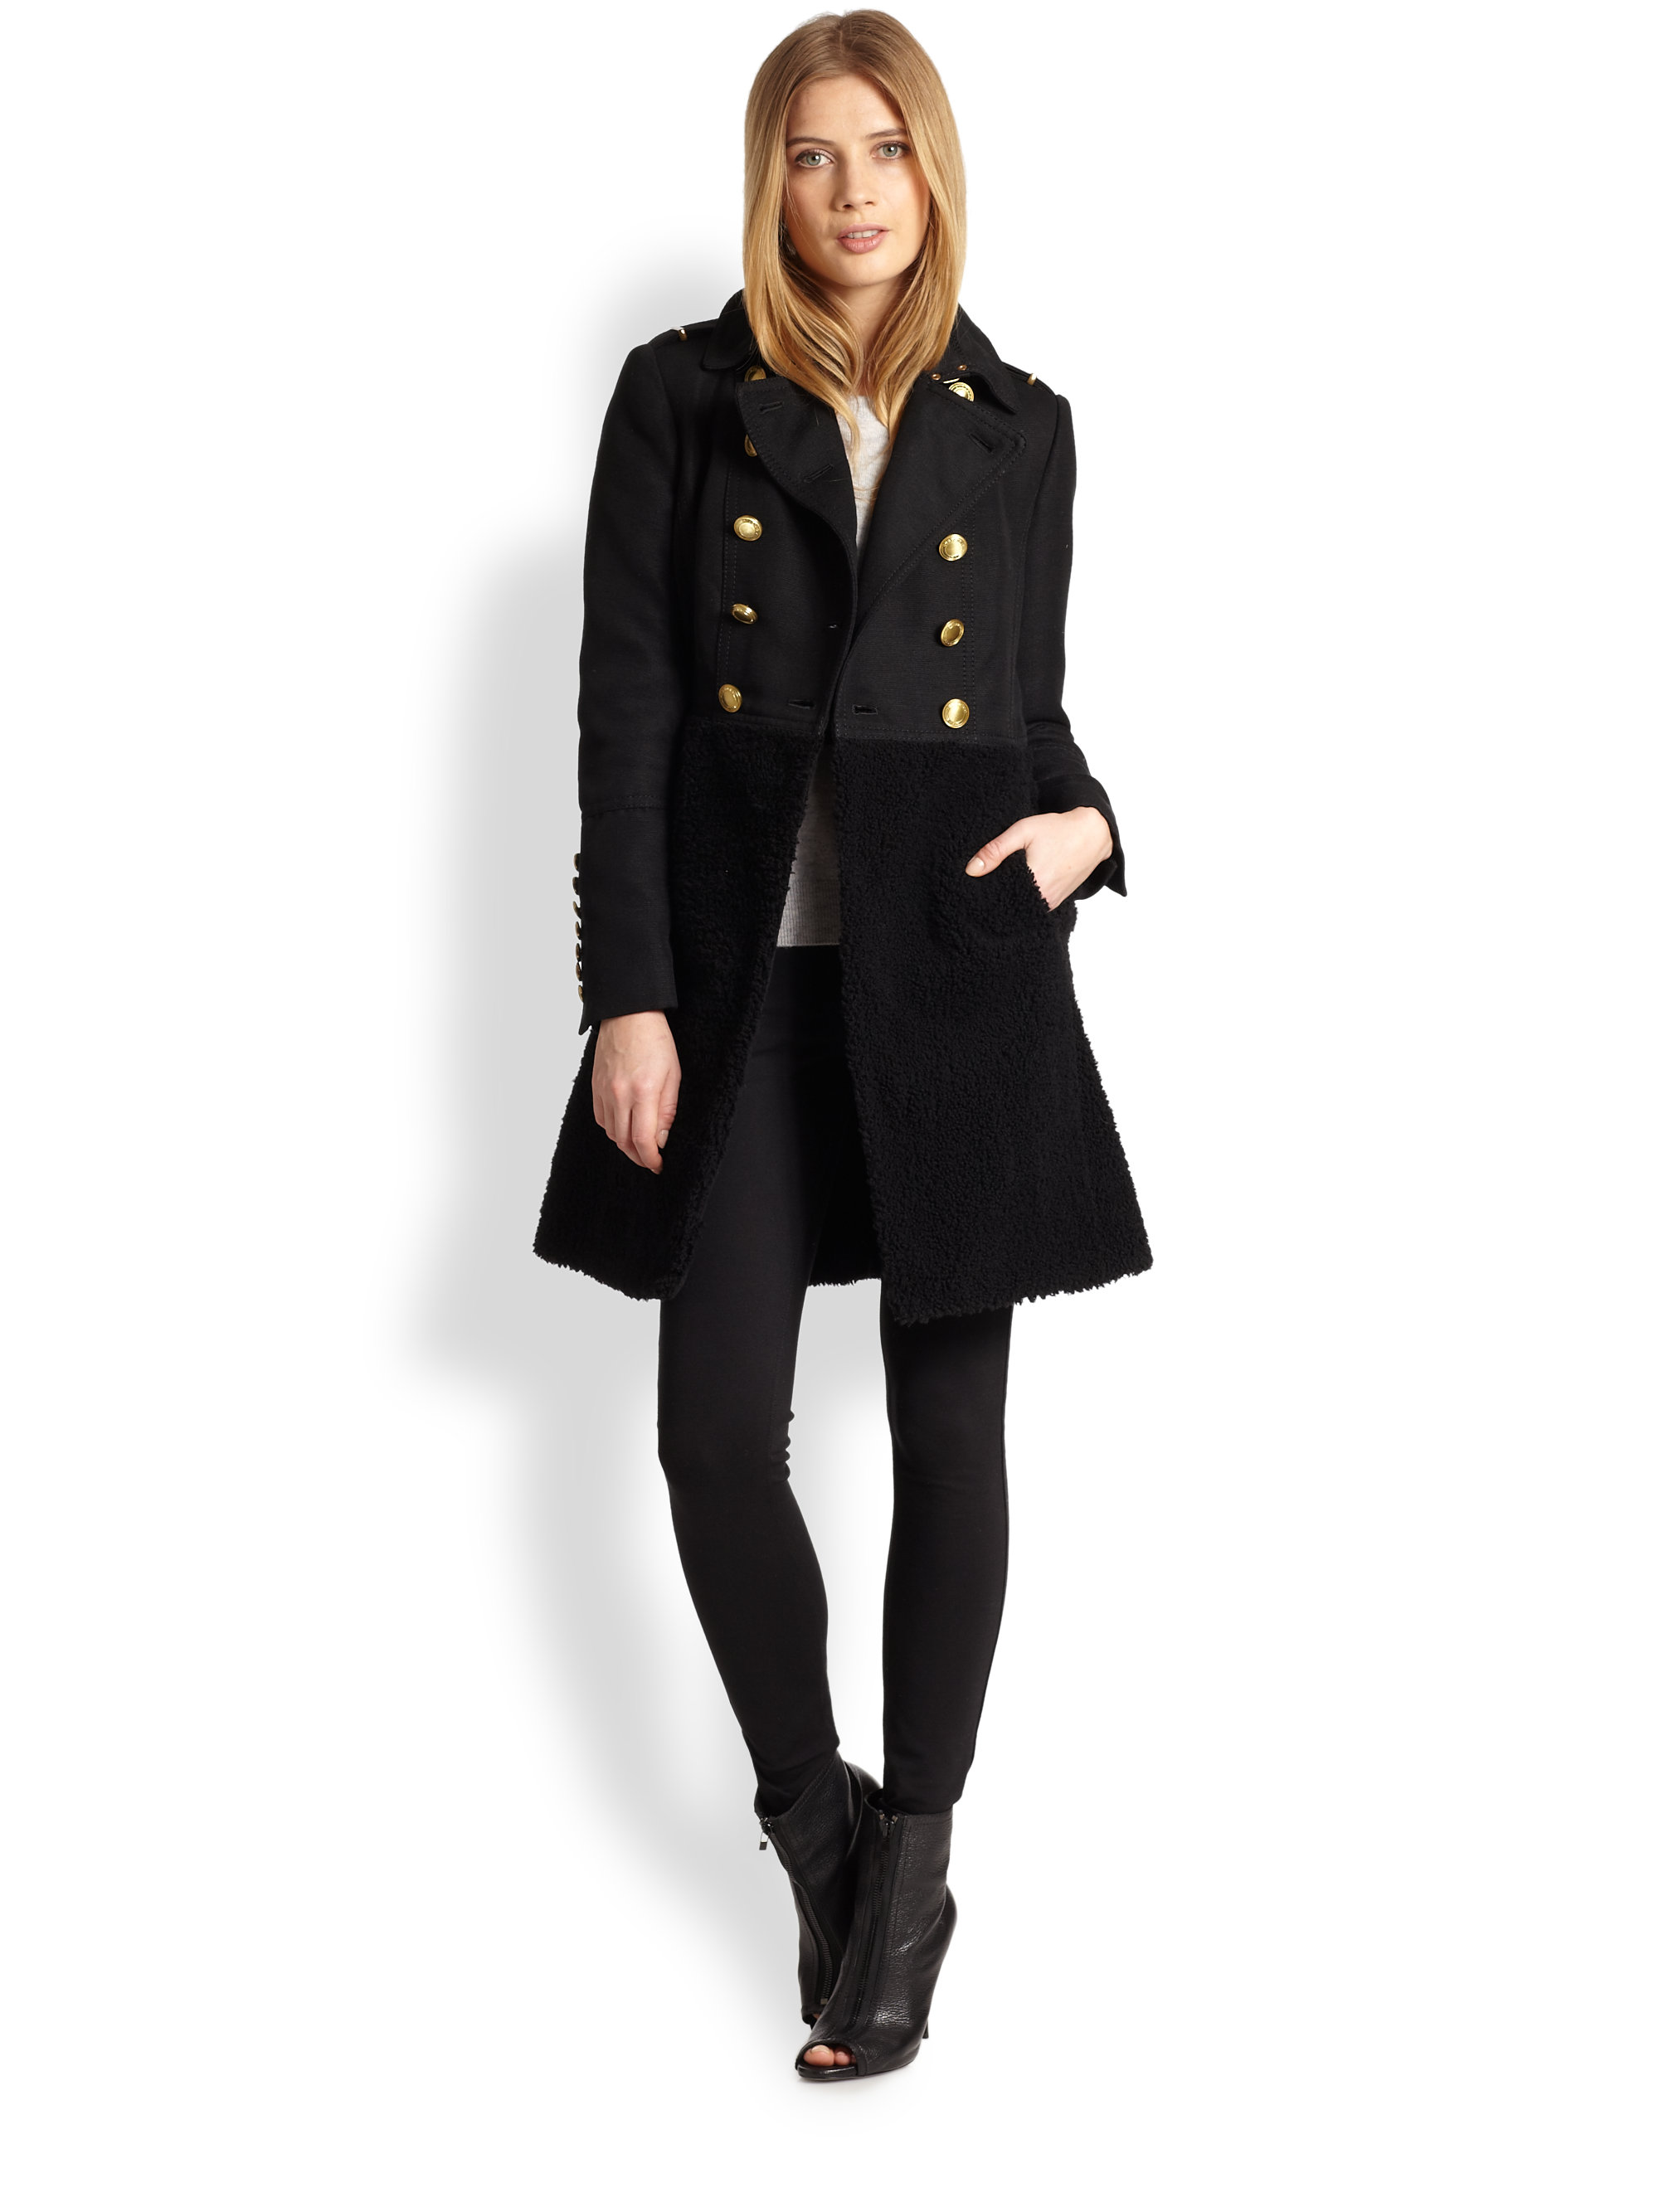 Lyst - Burberry brit Woolcotton Shearling Military Coat in Black